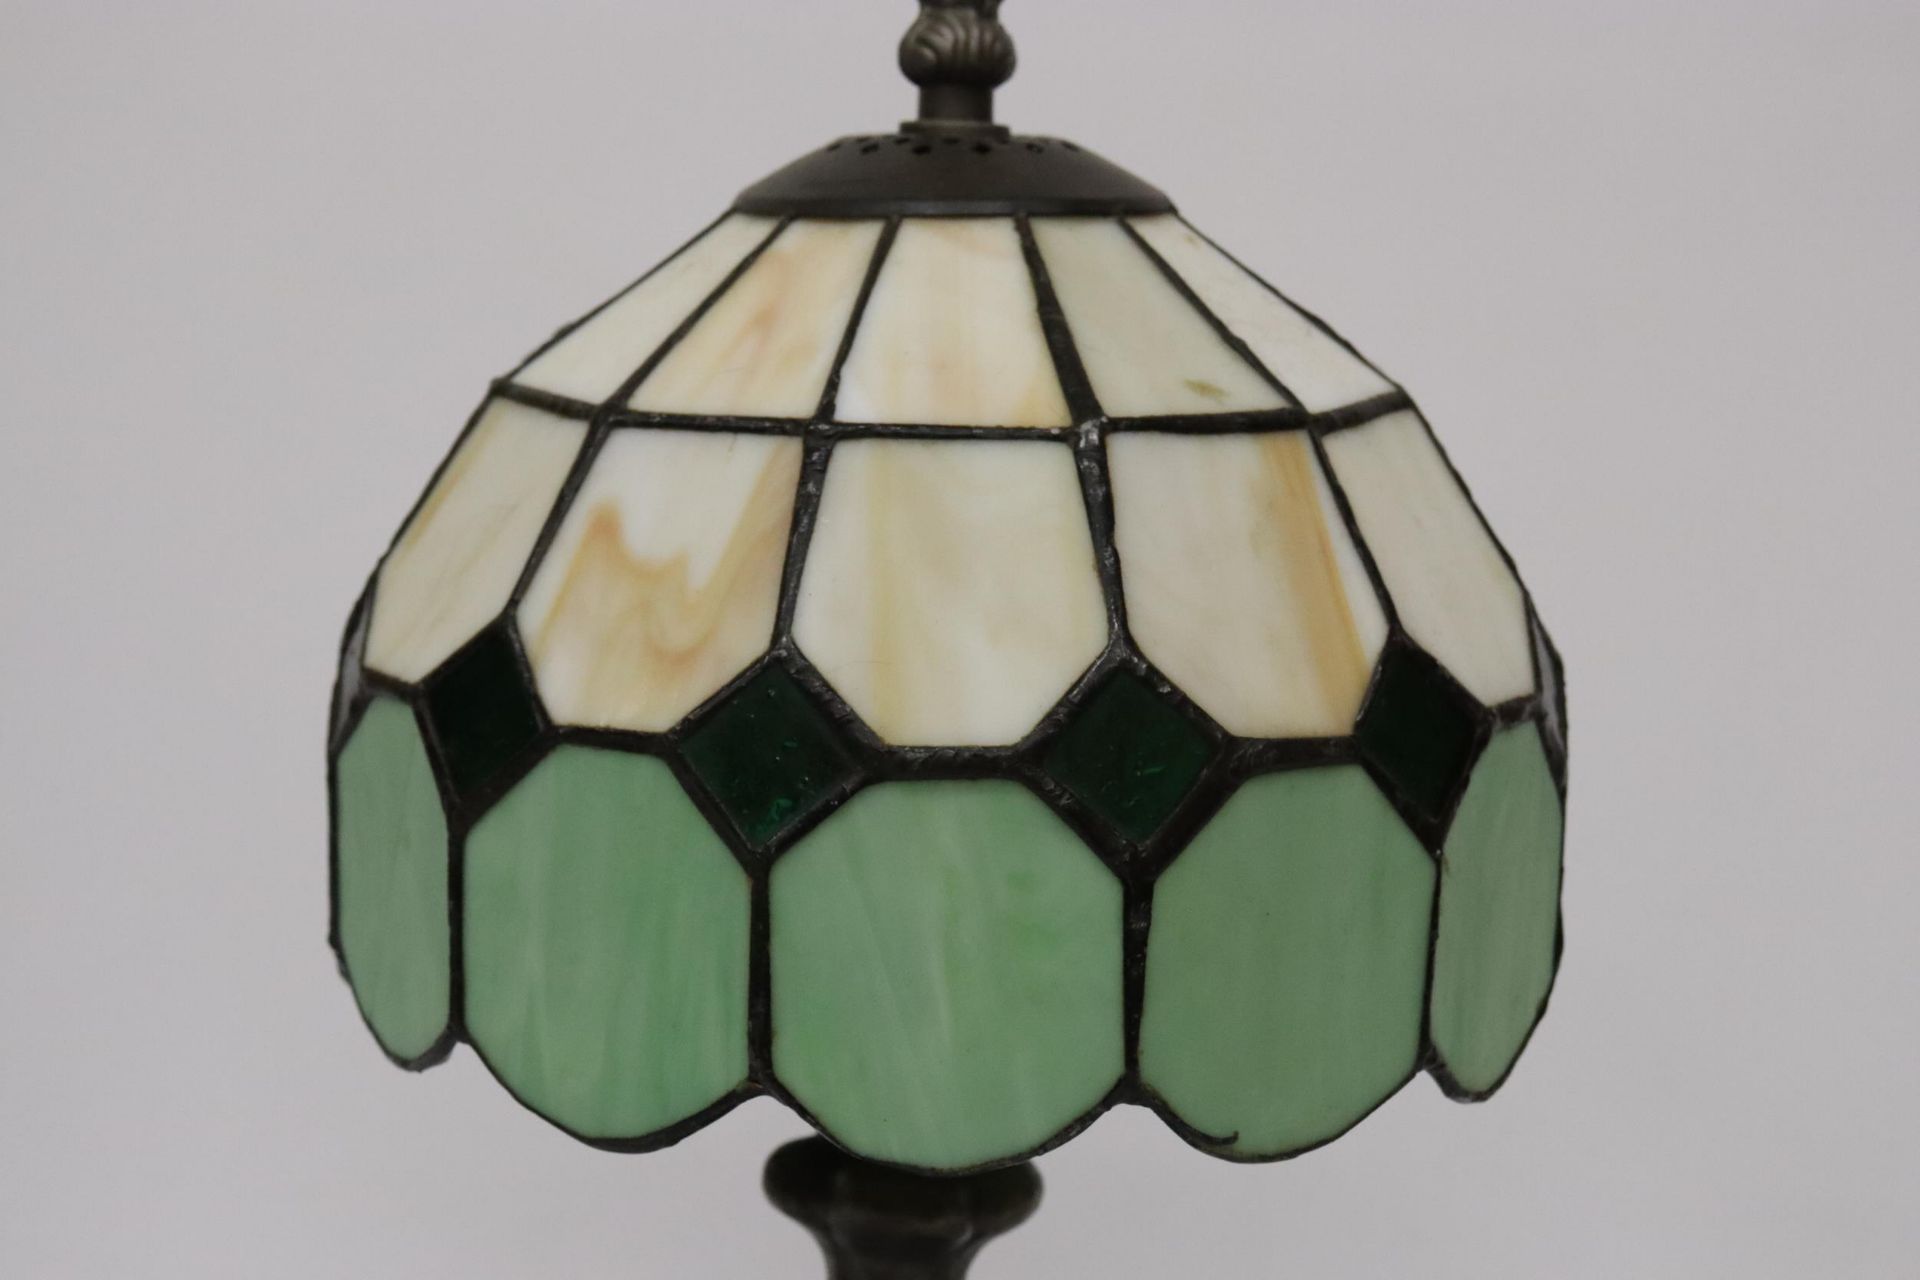 A TIFFANY STYLE TABLE LAMP - Image 3 of 4